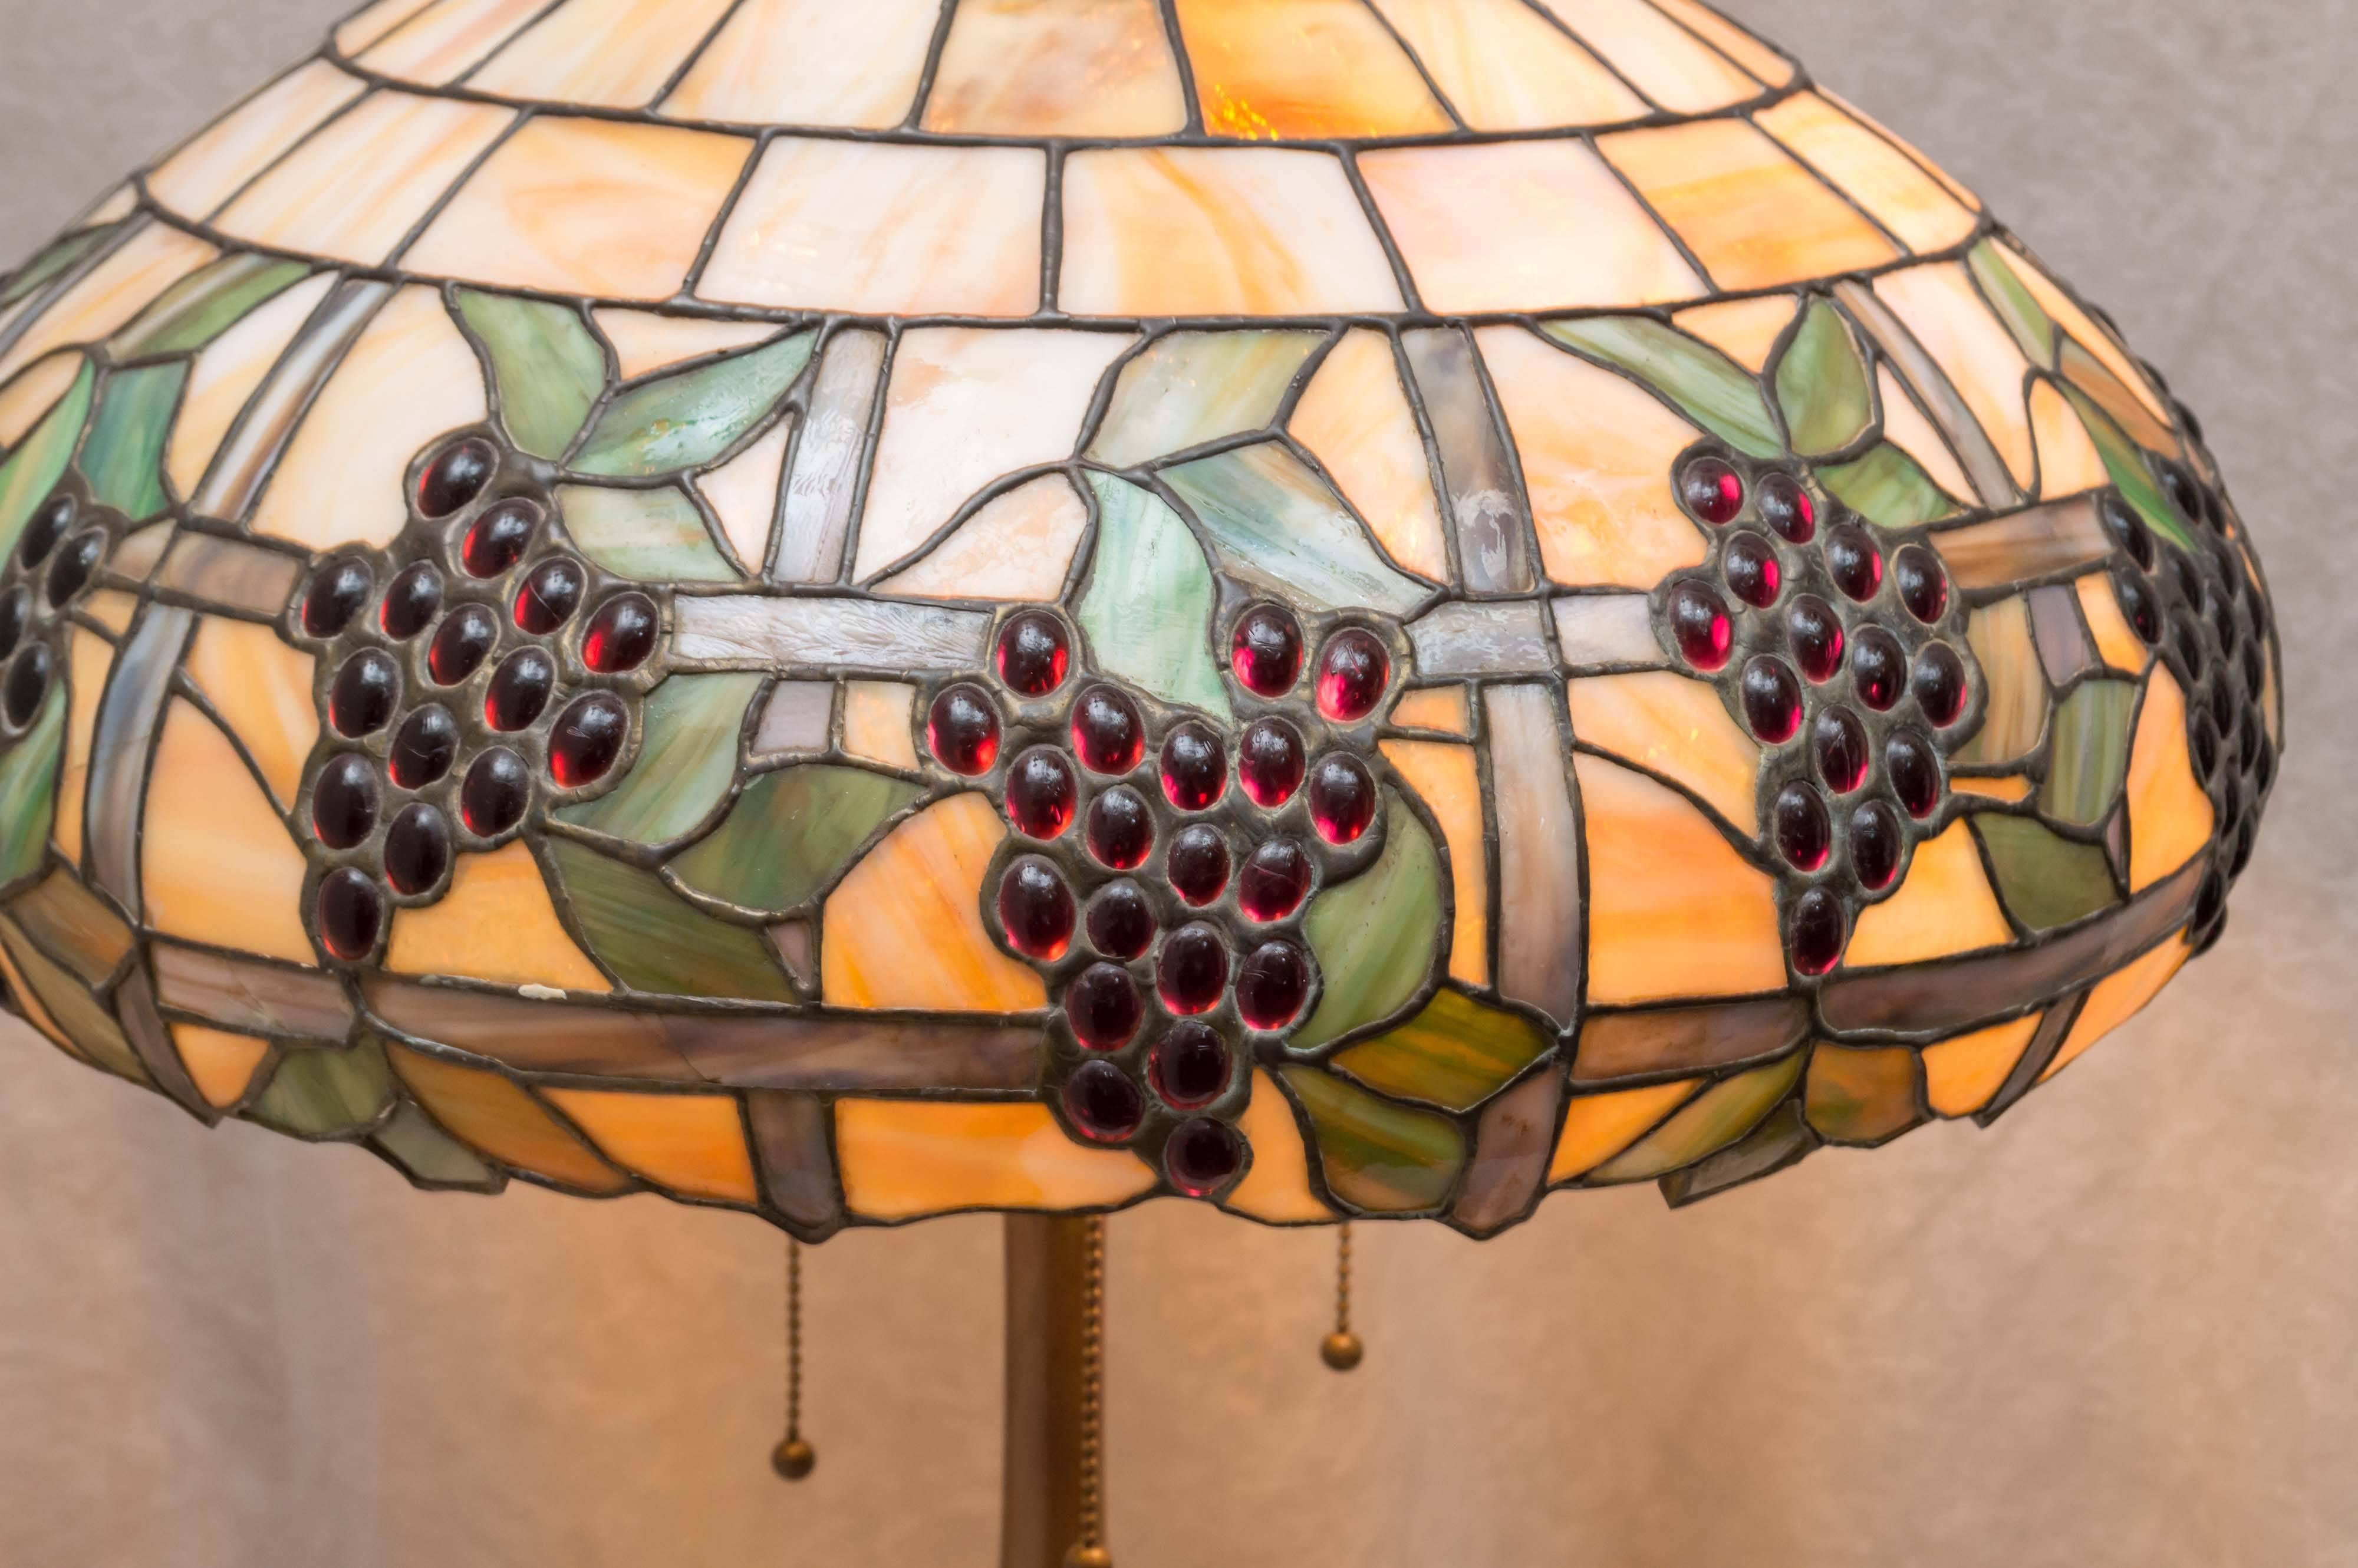 This colorful and high quality table lamp is a fine example of leaded glass lamps. The shade has many bent tiles and colorful grapes that extend beyond the other design. The base is bronze, is cast and heavy. Not the cheap thin metal. We have